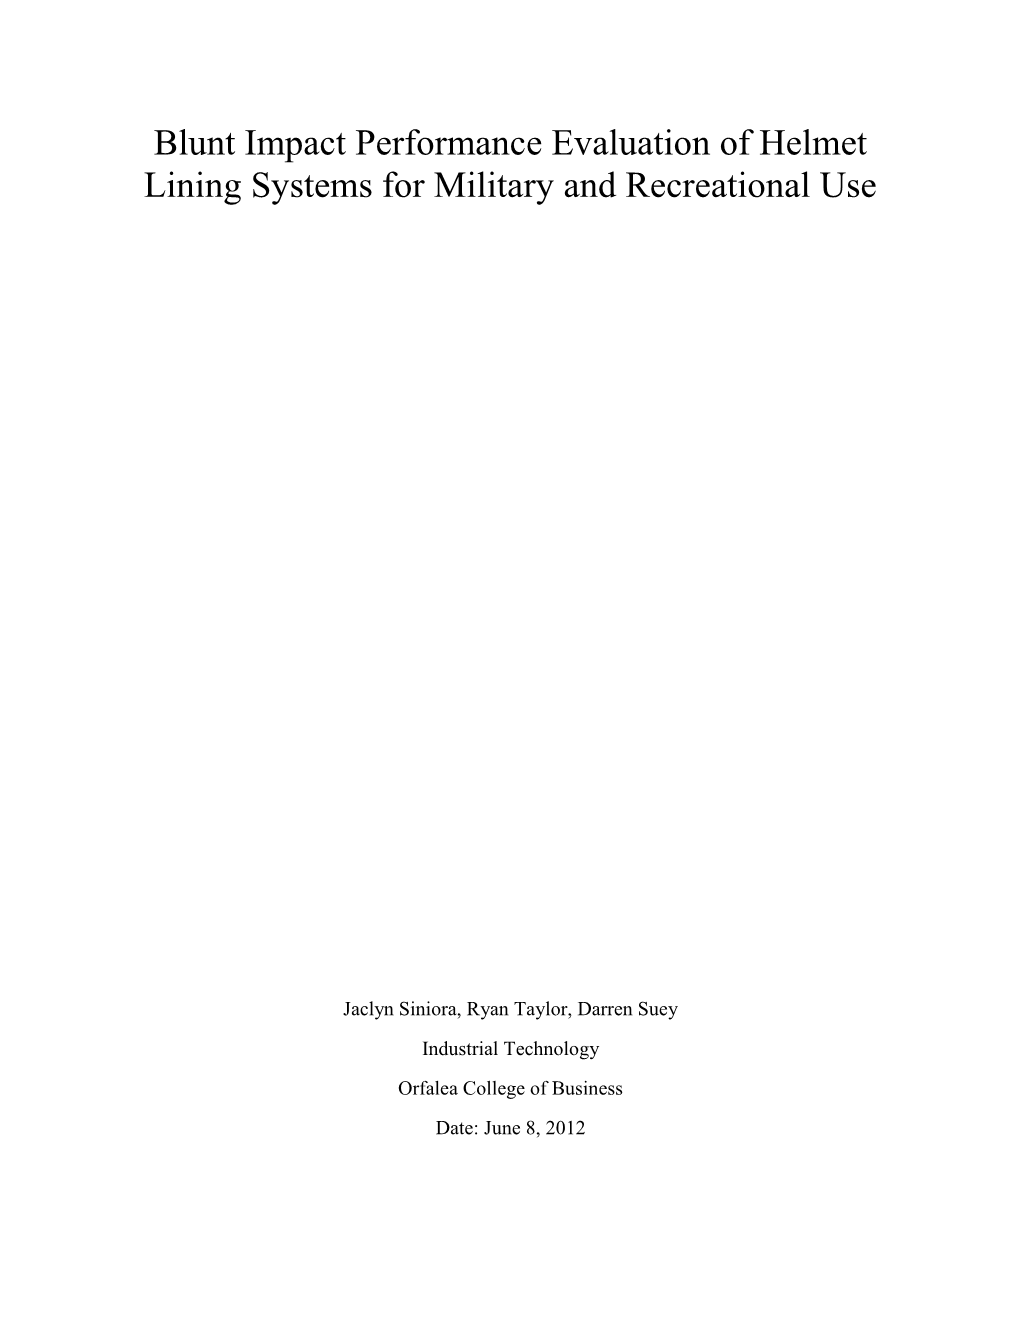 Blunt Impact Performance Evaluation of Helmet Lining Systems for Military and Recreational Use